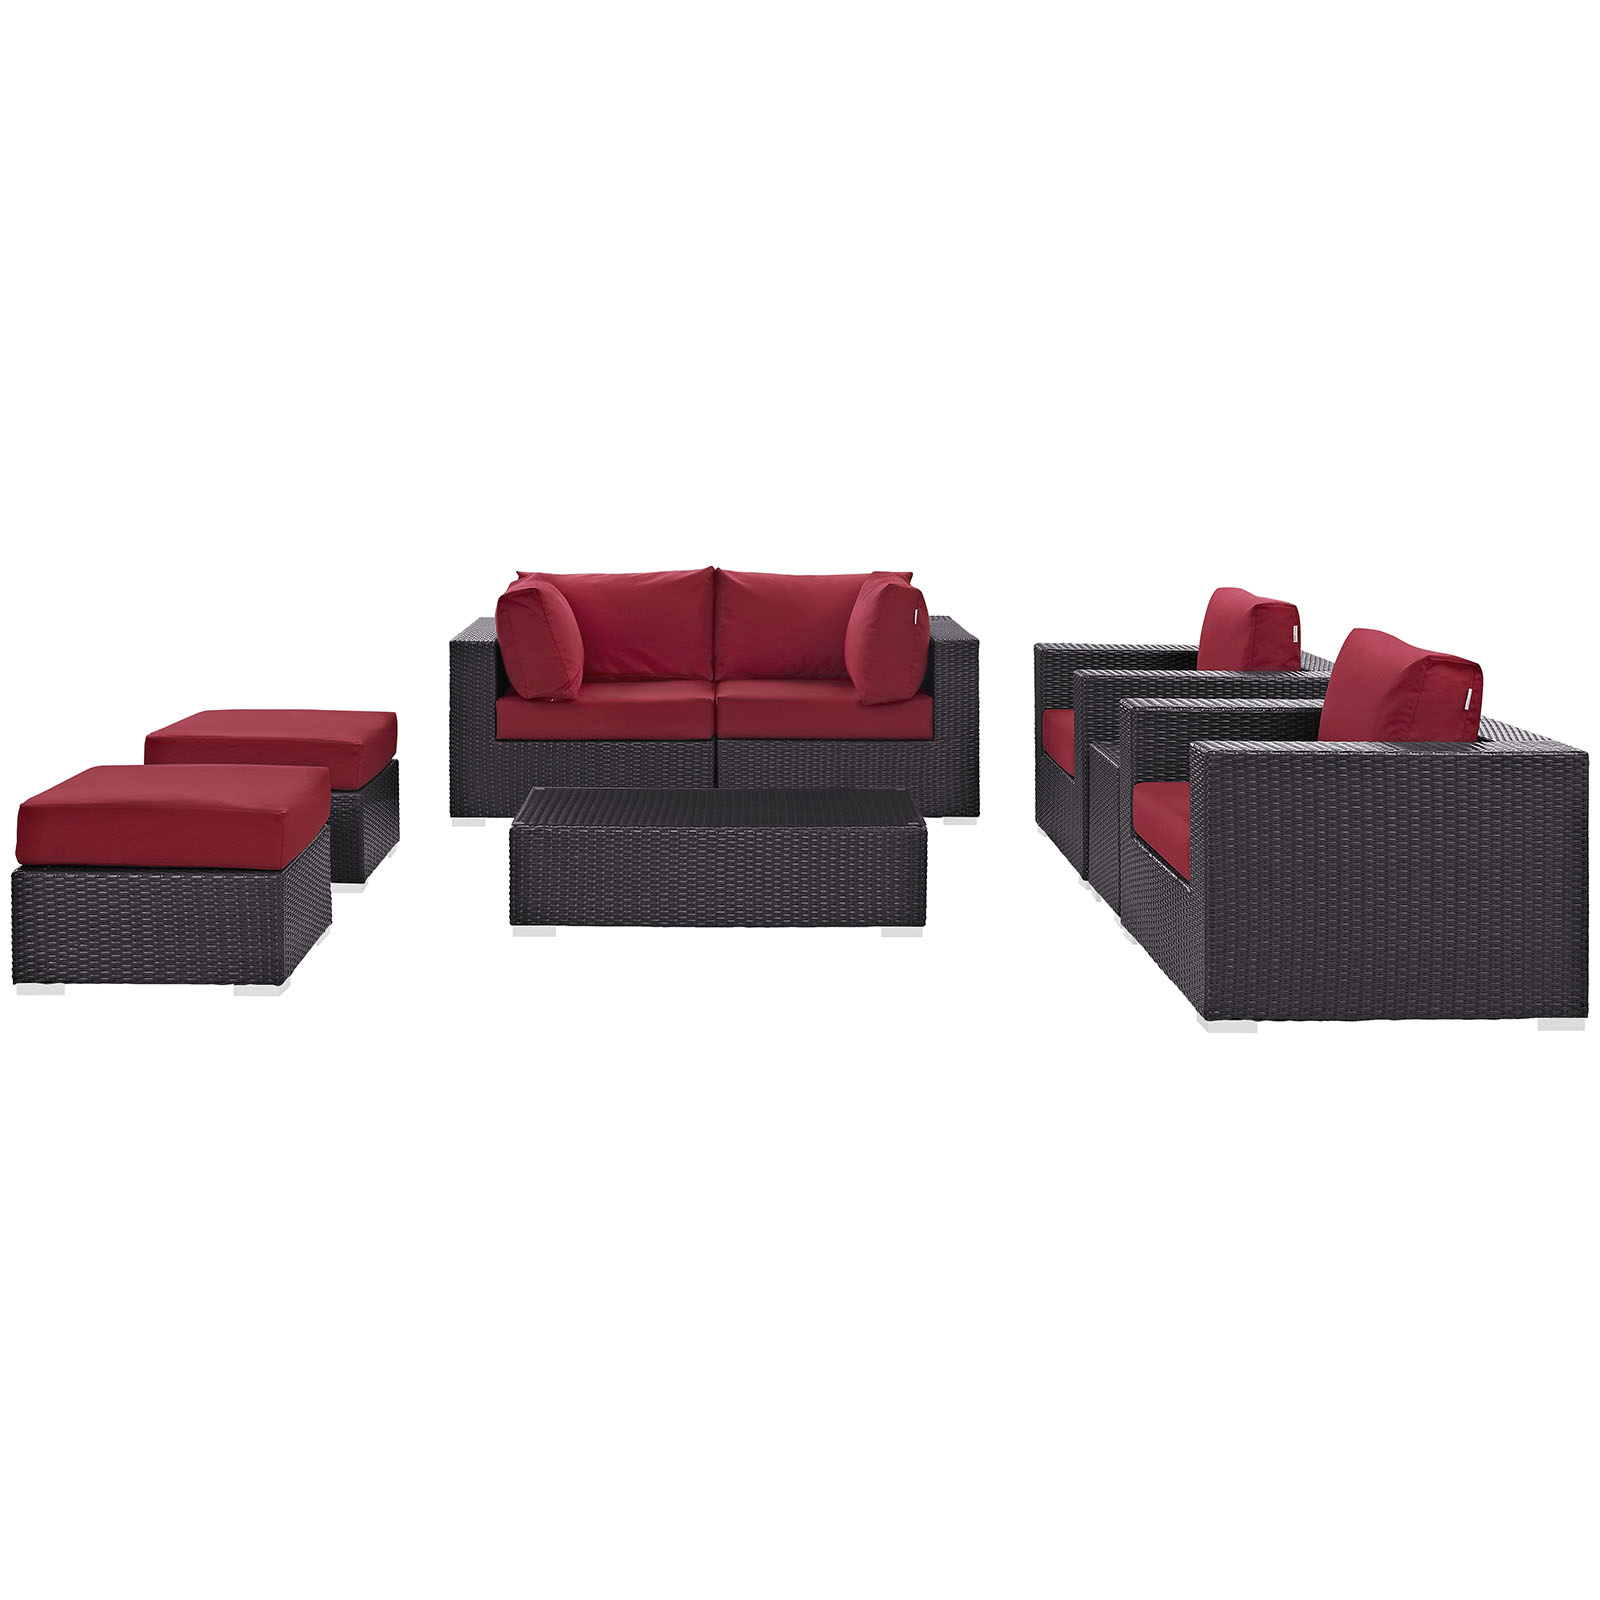 Modway Convene 8 Piece Outdoor Patio Sectional Set in Espresso Red - image 4 of 11